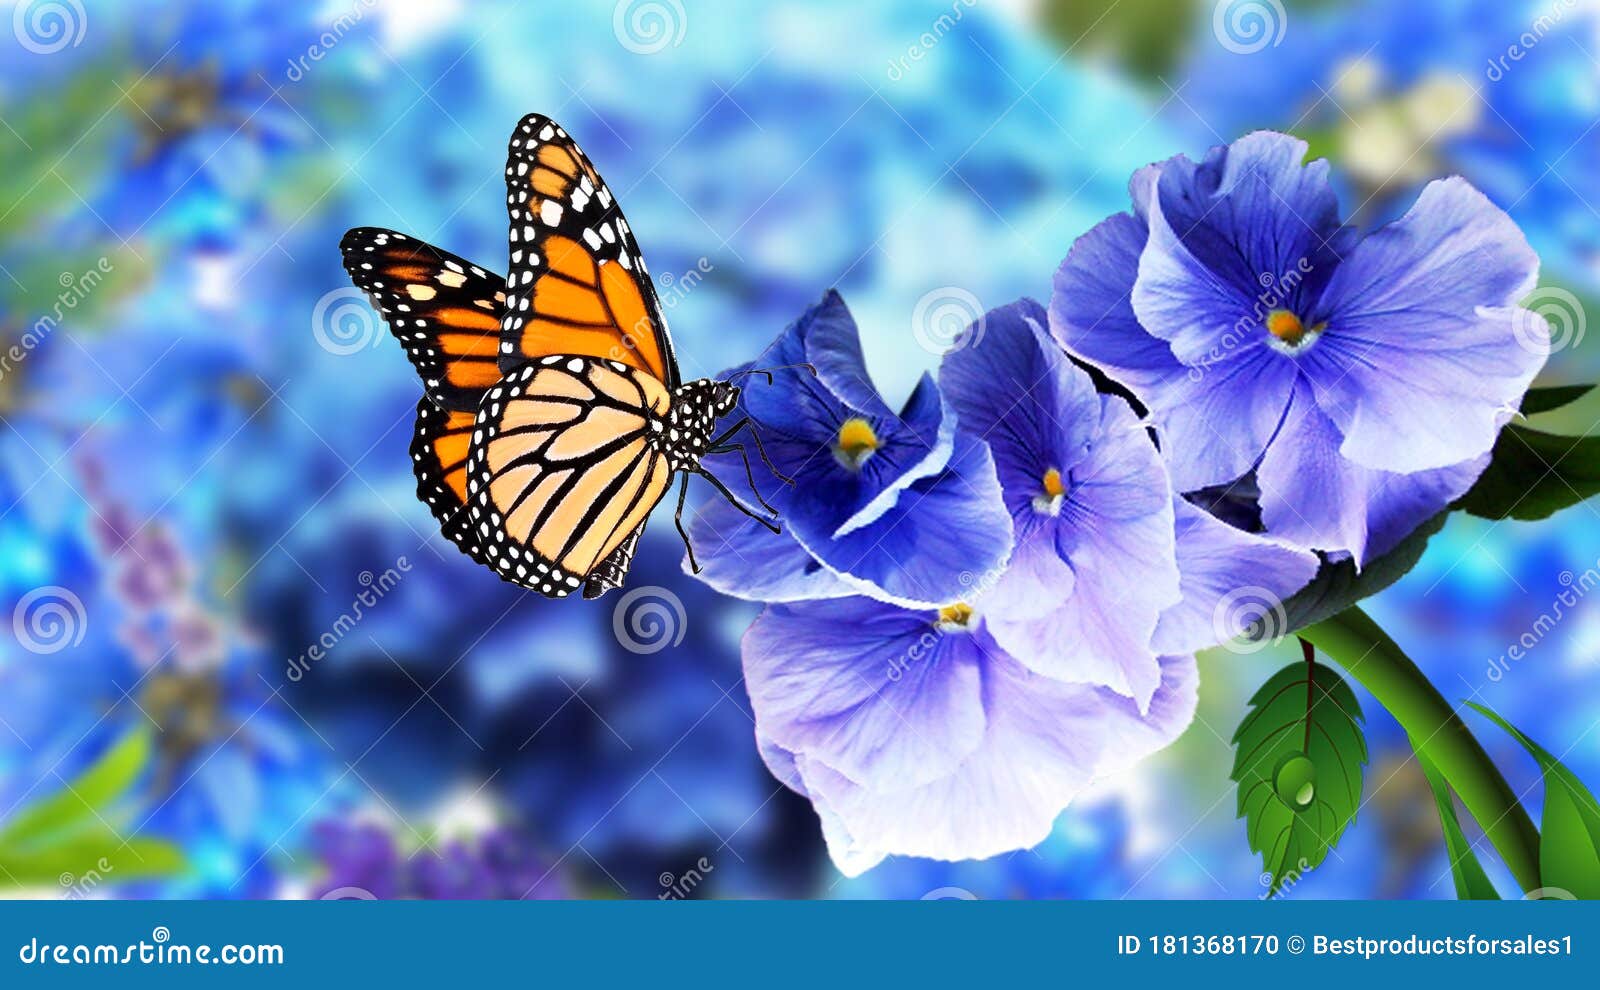 Butterfly on Flowers with Blurry Natural Background. Beautiful ...